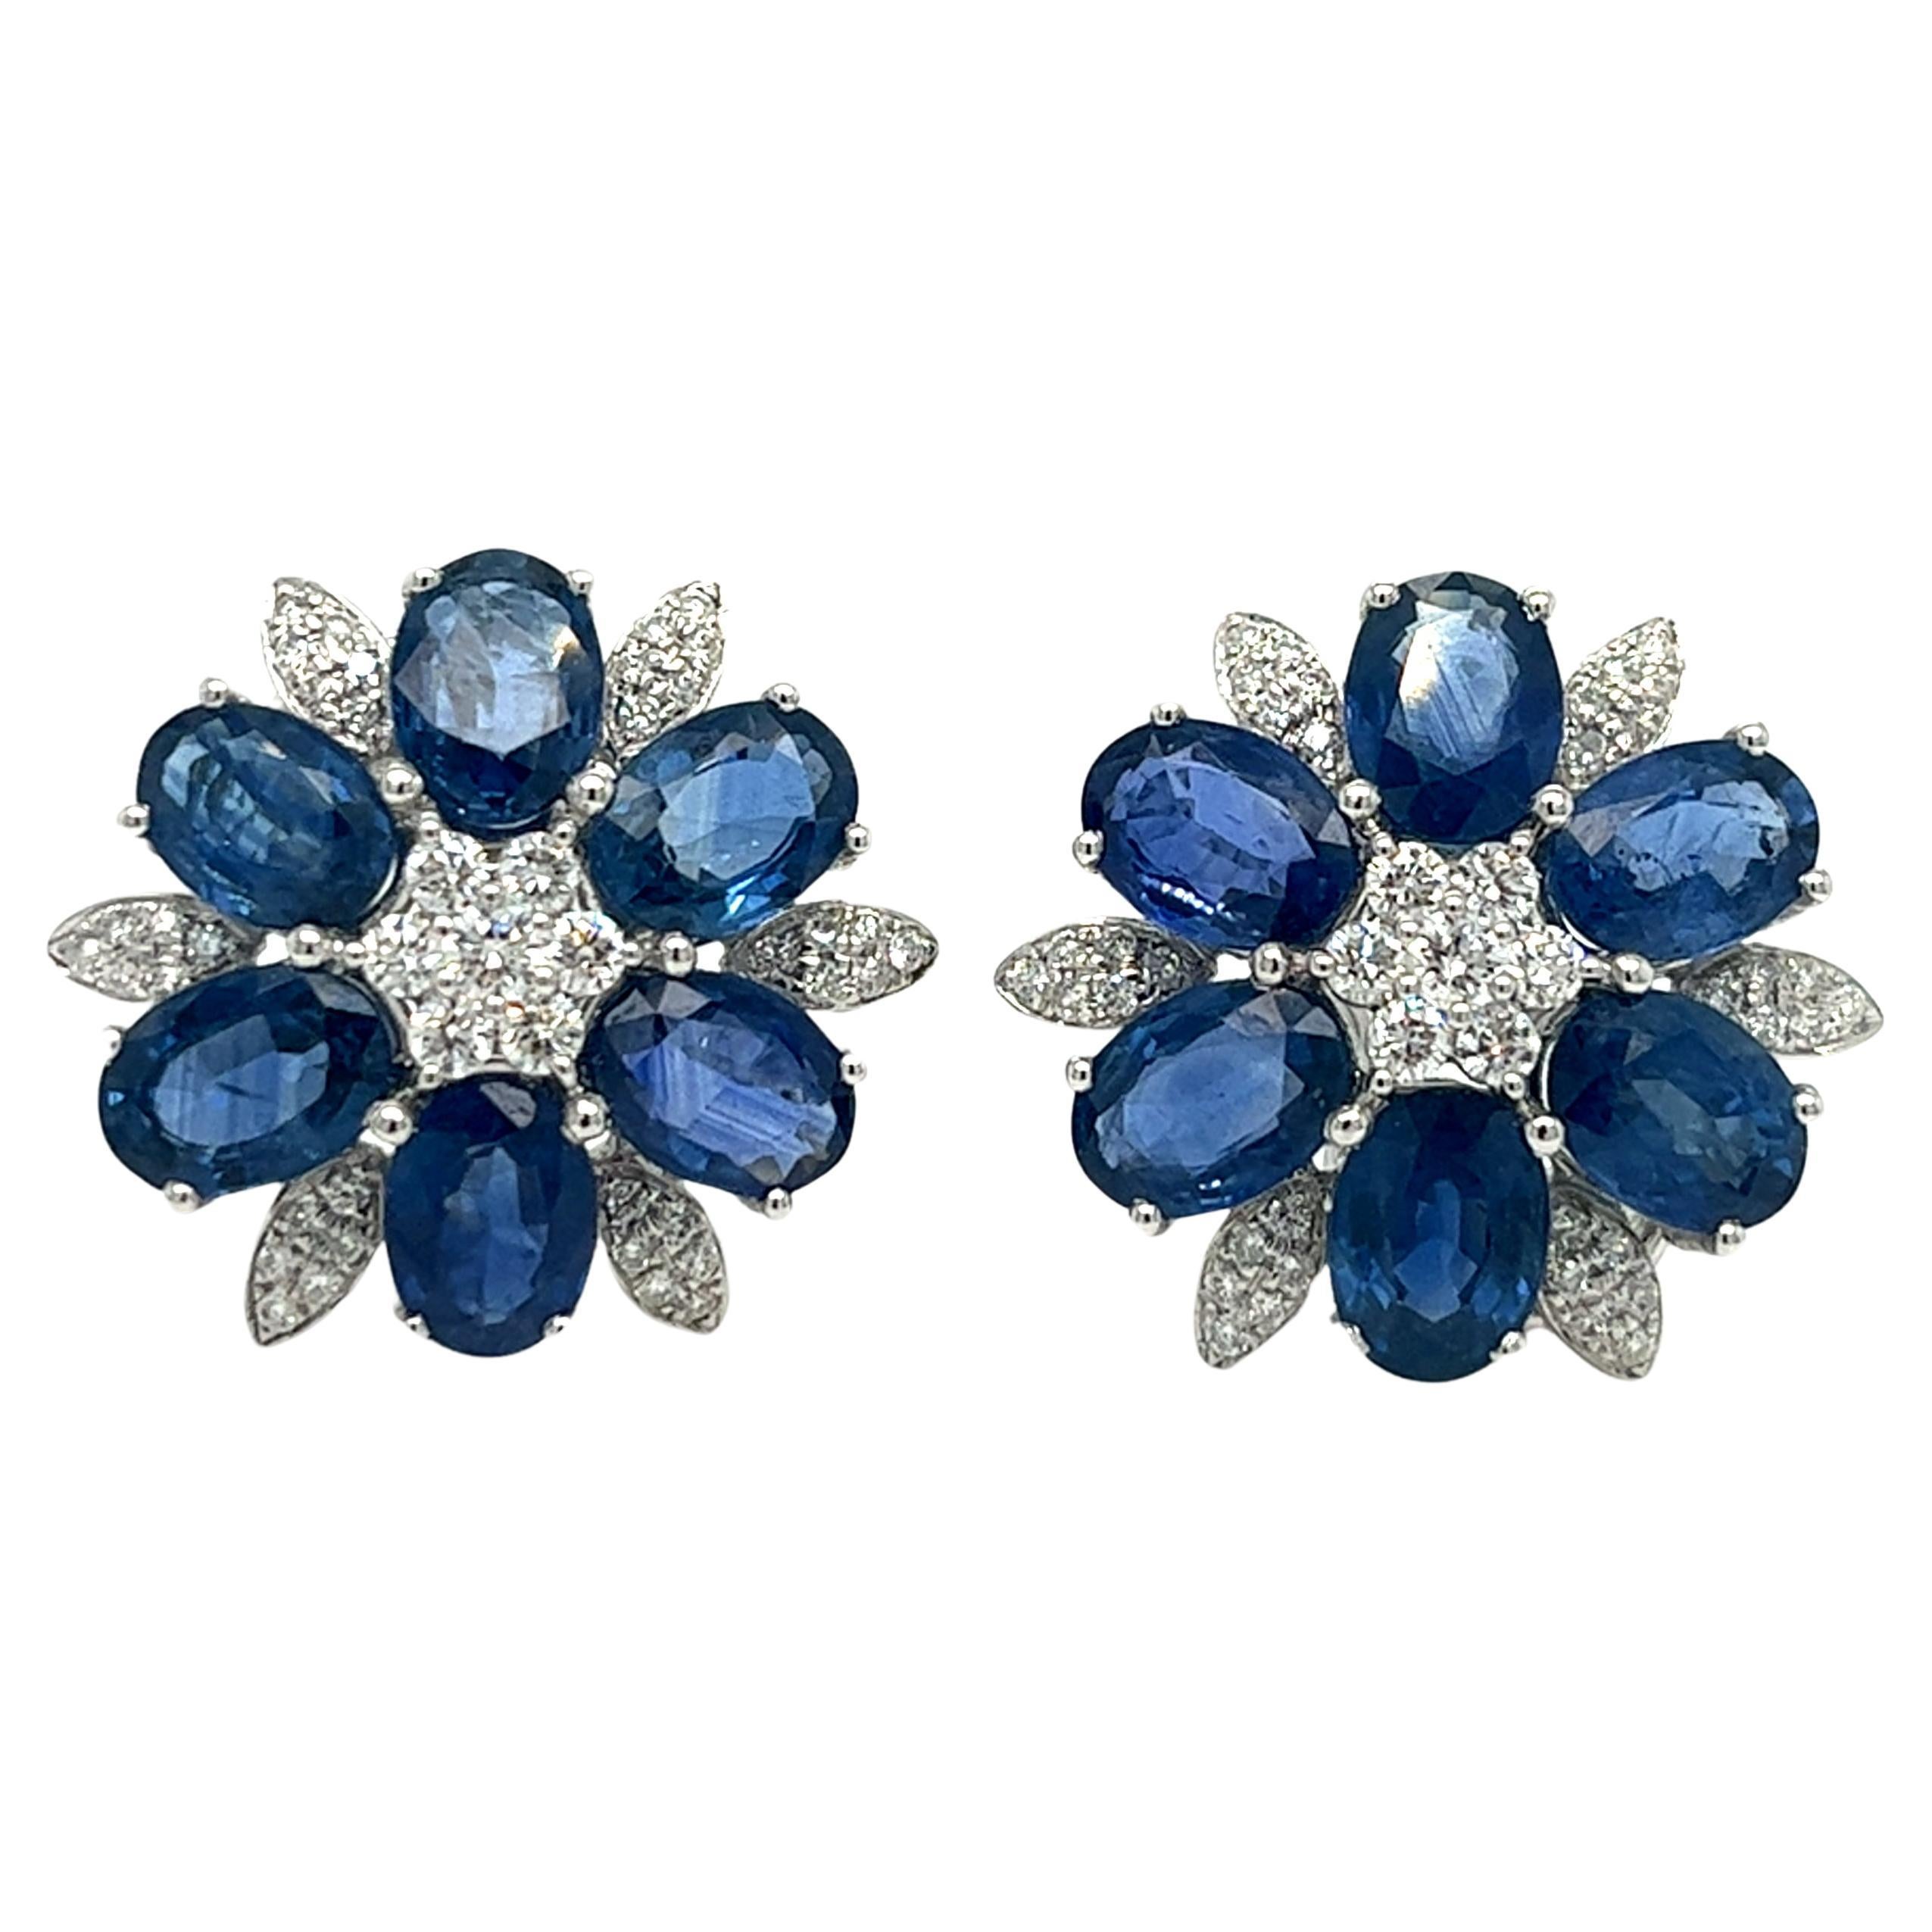 Earrings Flowers with Blue Sapphires 10.31 cts & Diamonds 0.80 cts.